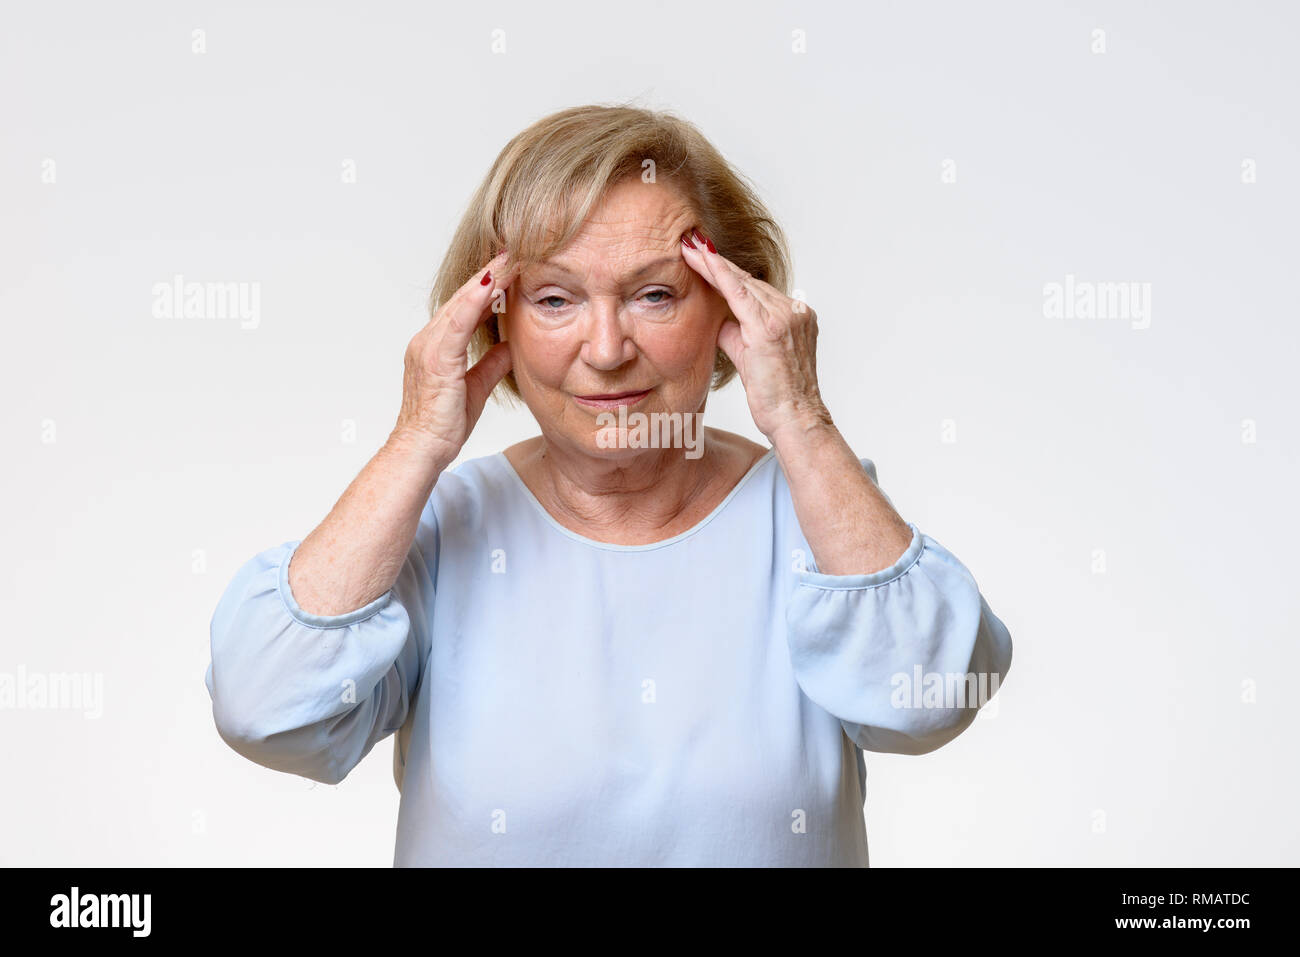 Senior woman suffering from a severe headache rubbing her temples with her fingers with an expression of pain on her face Stock Photo